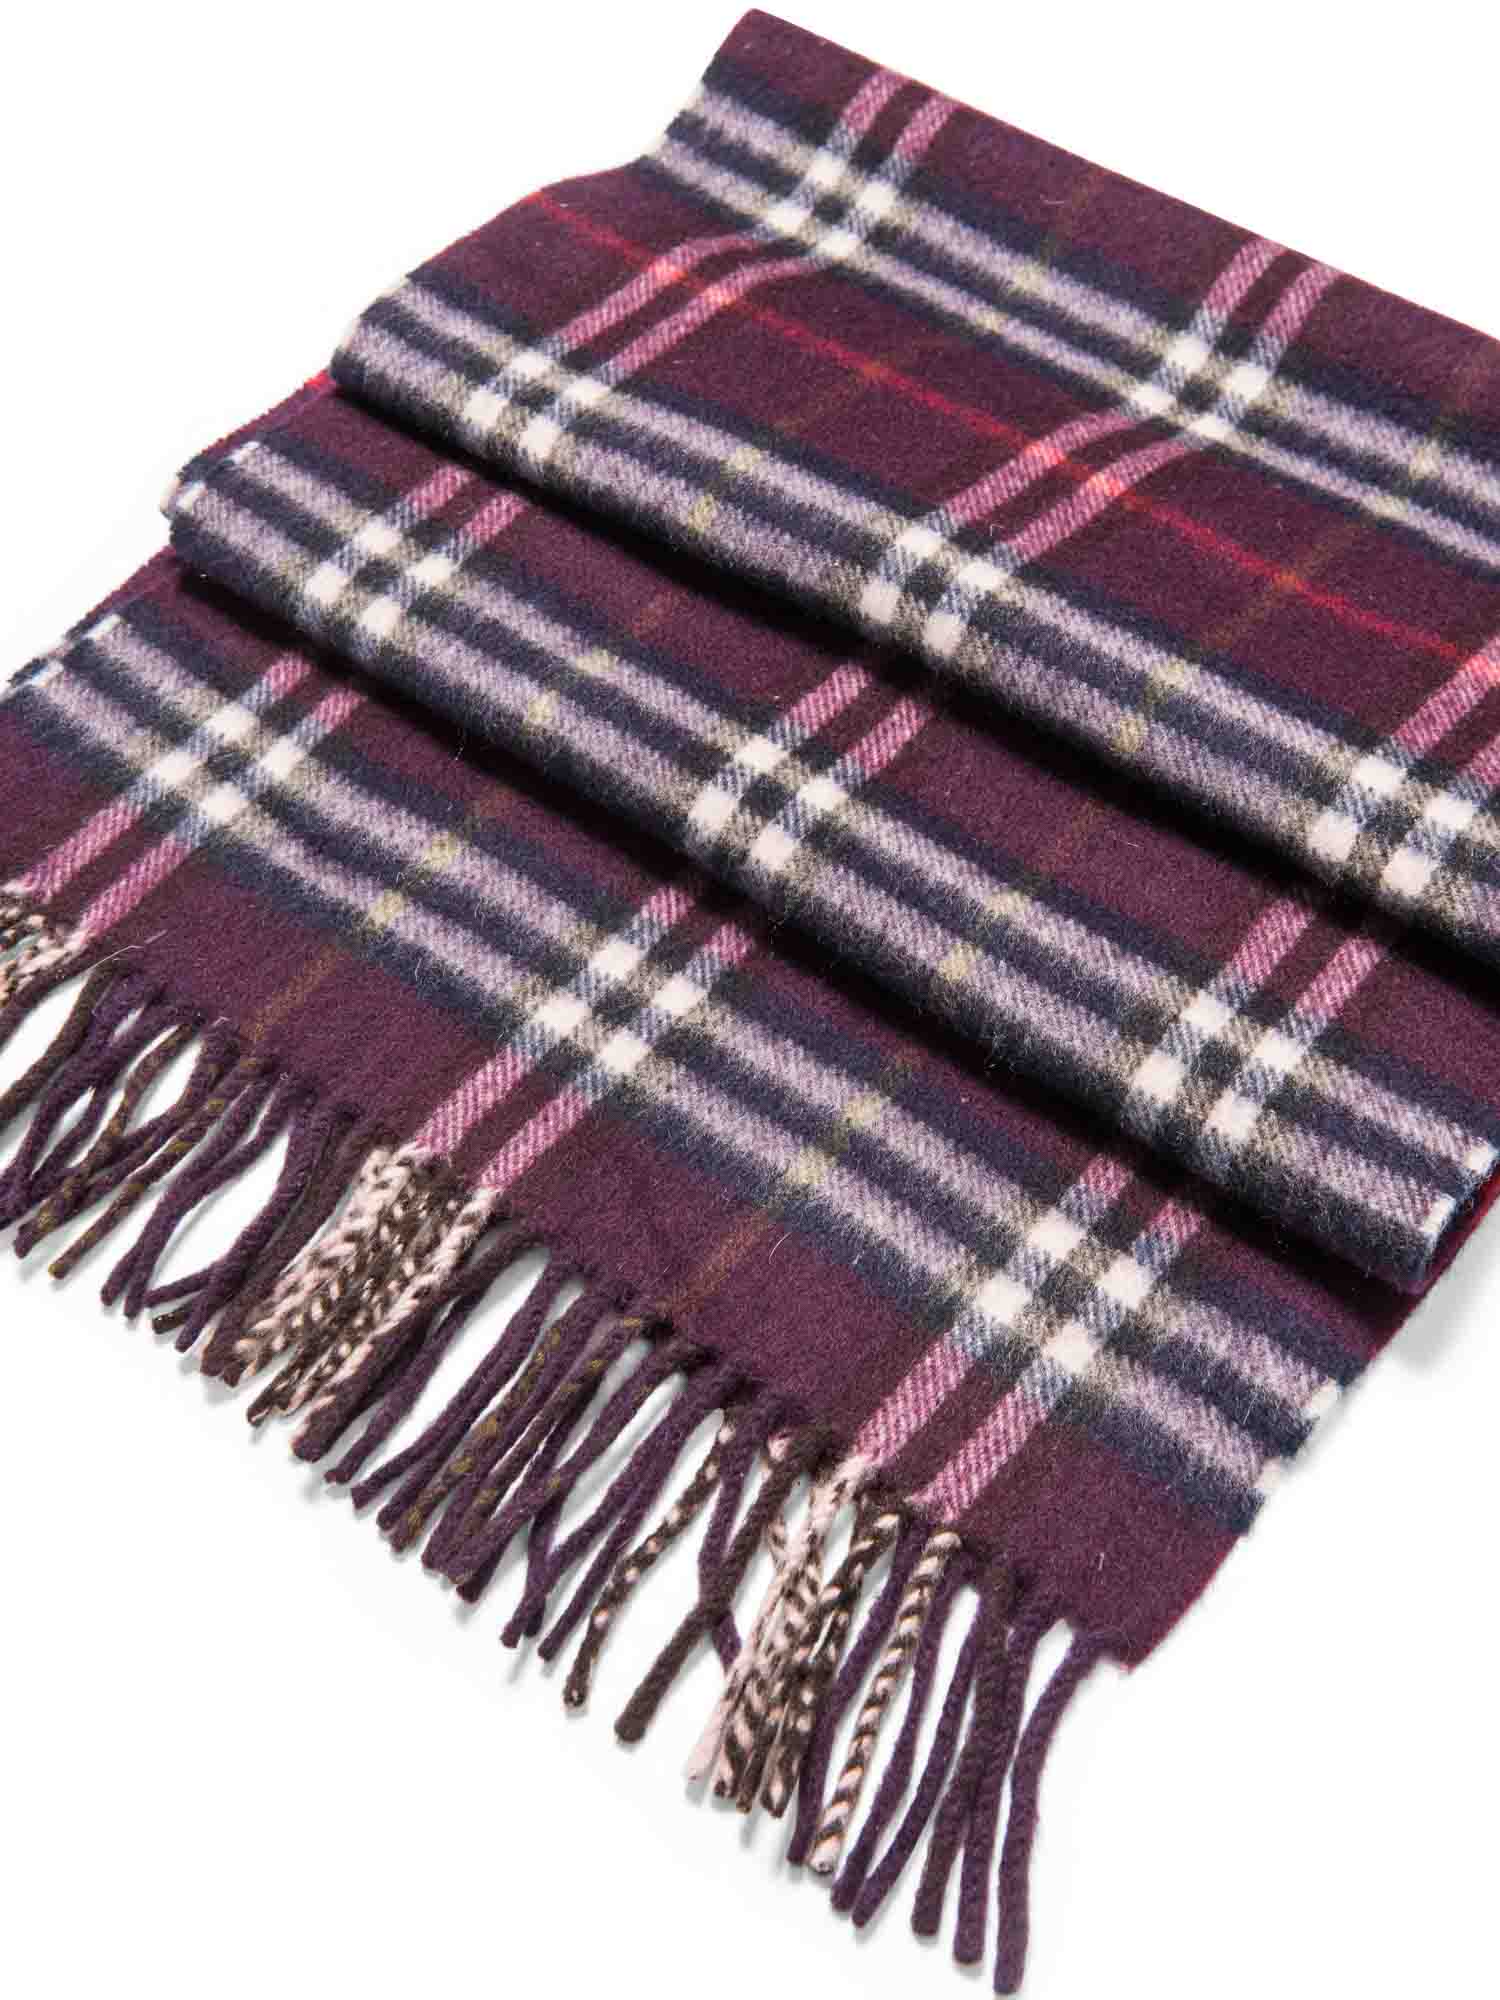 Burberry Cashmere House Check Fringe Scarf Burgundy